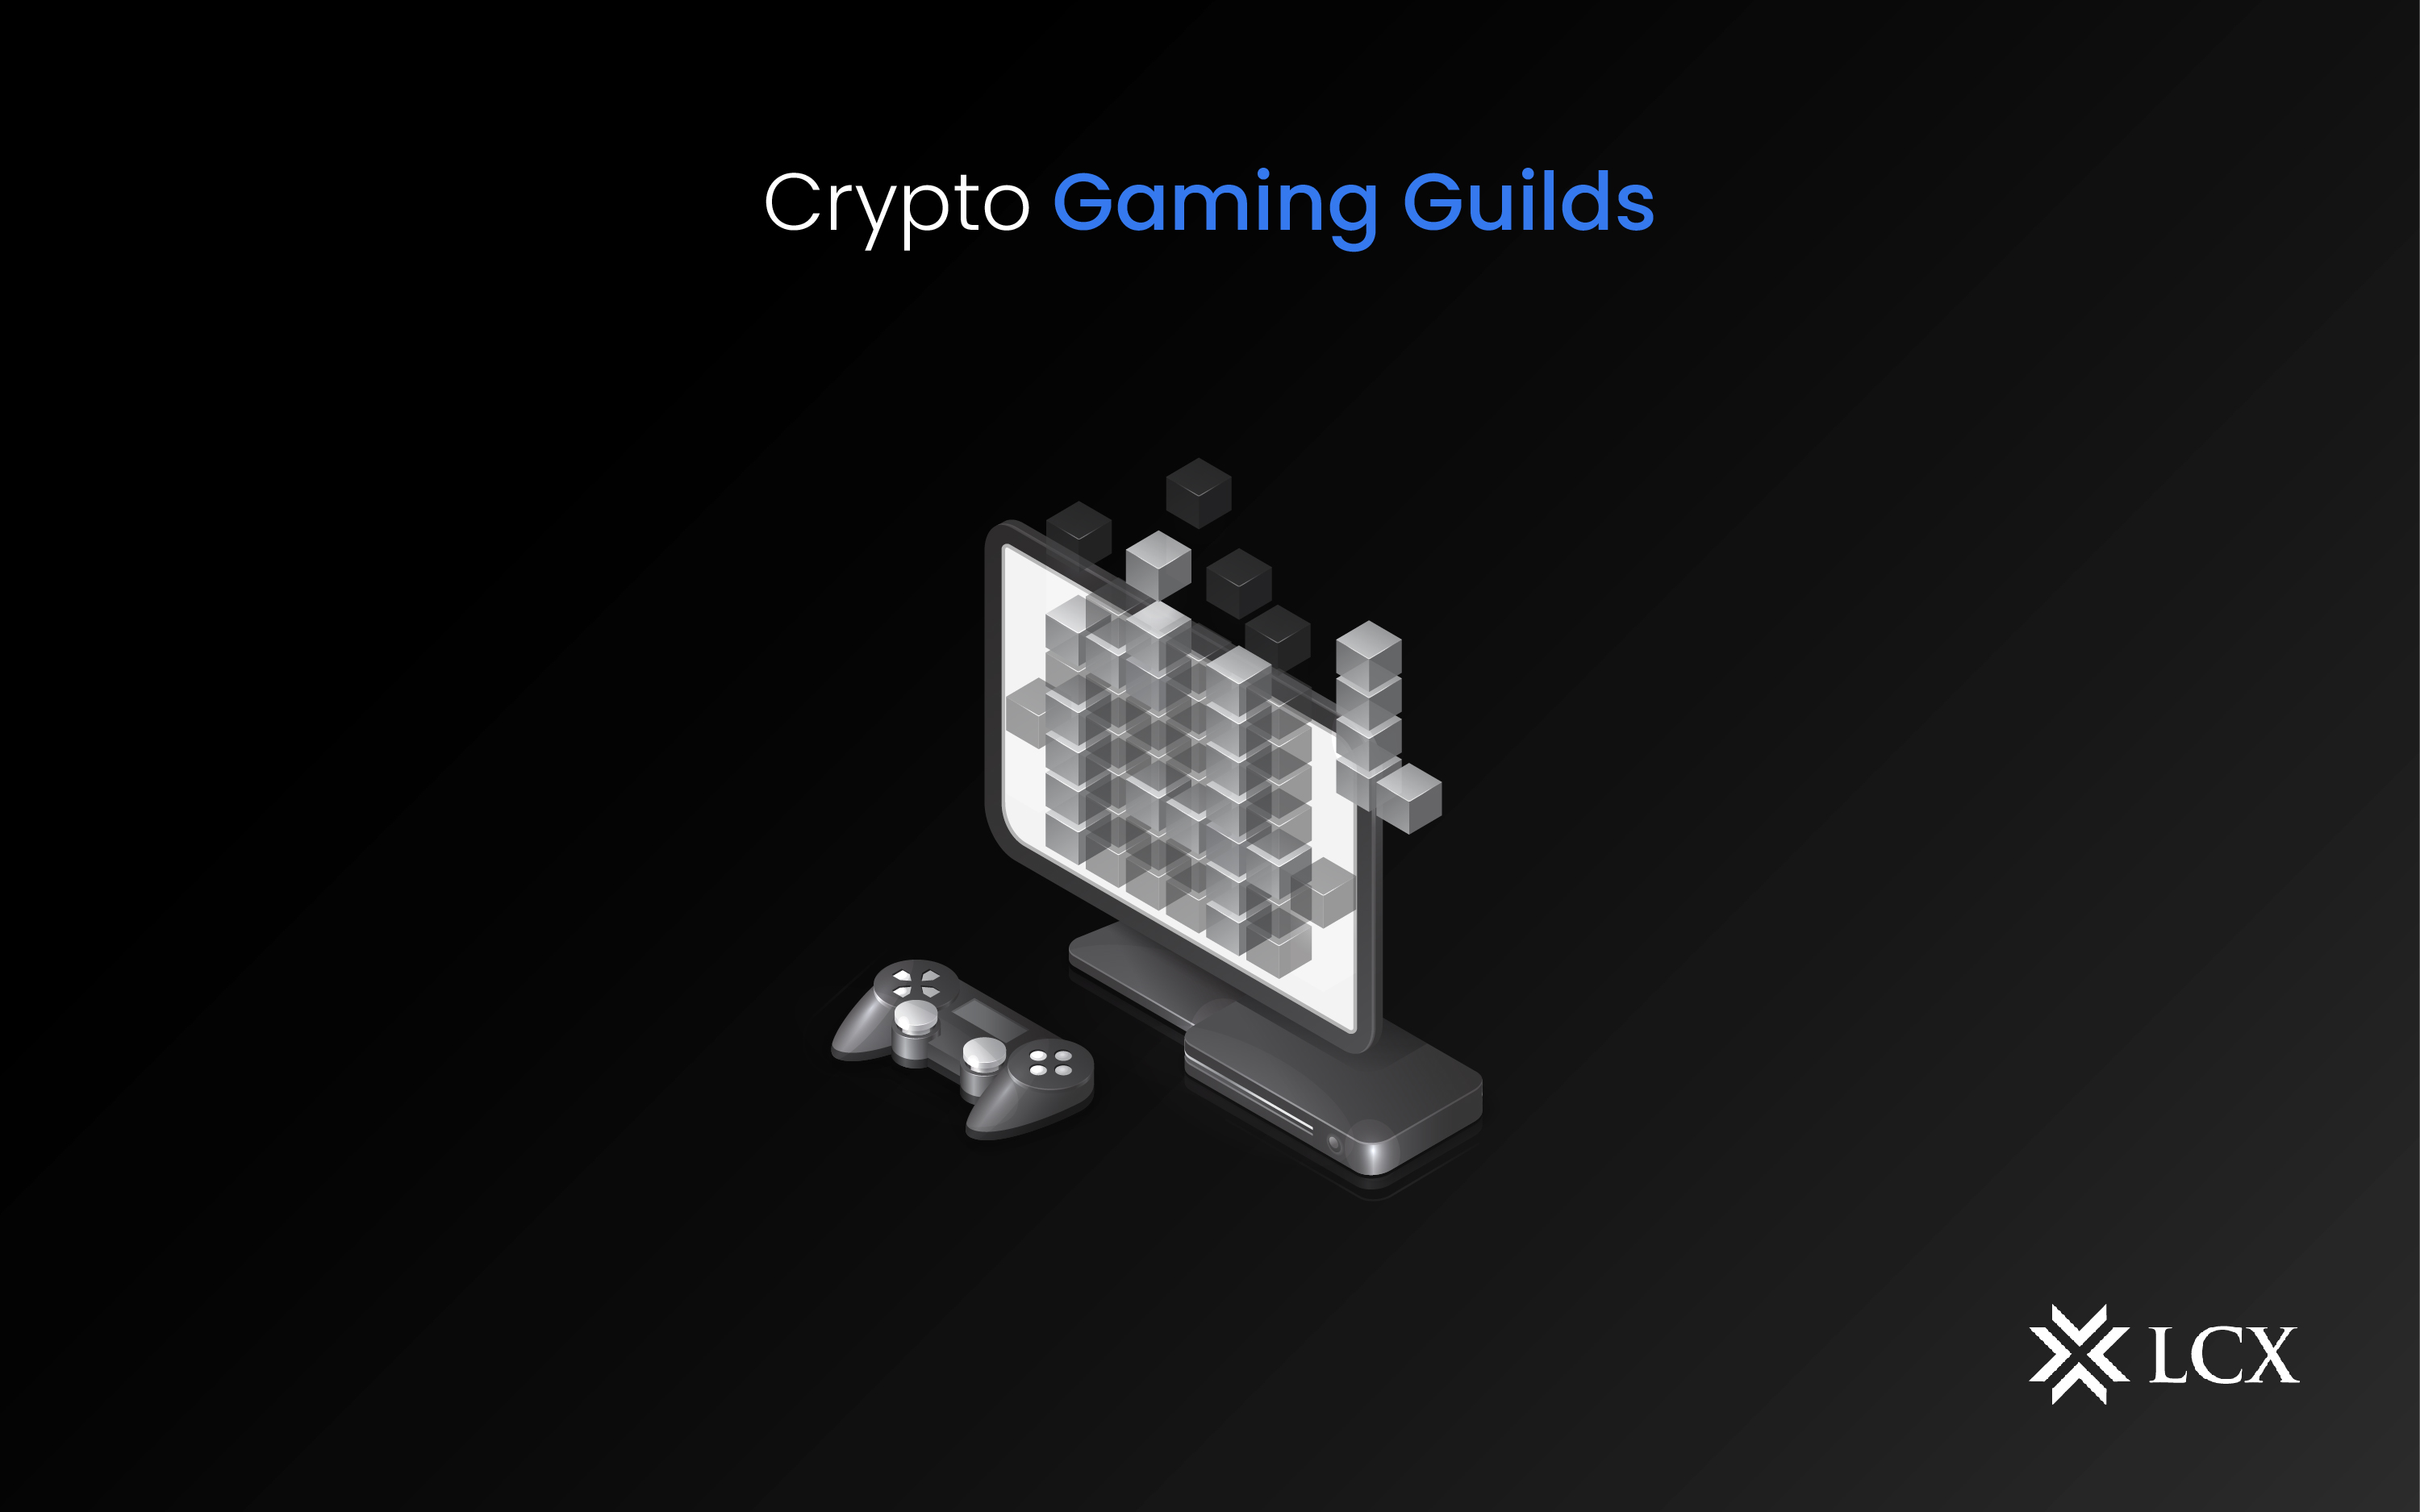 Guild Leader of Block Chain Online Gaming - CQ｜